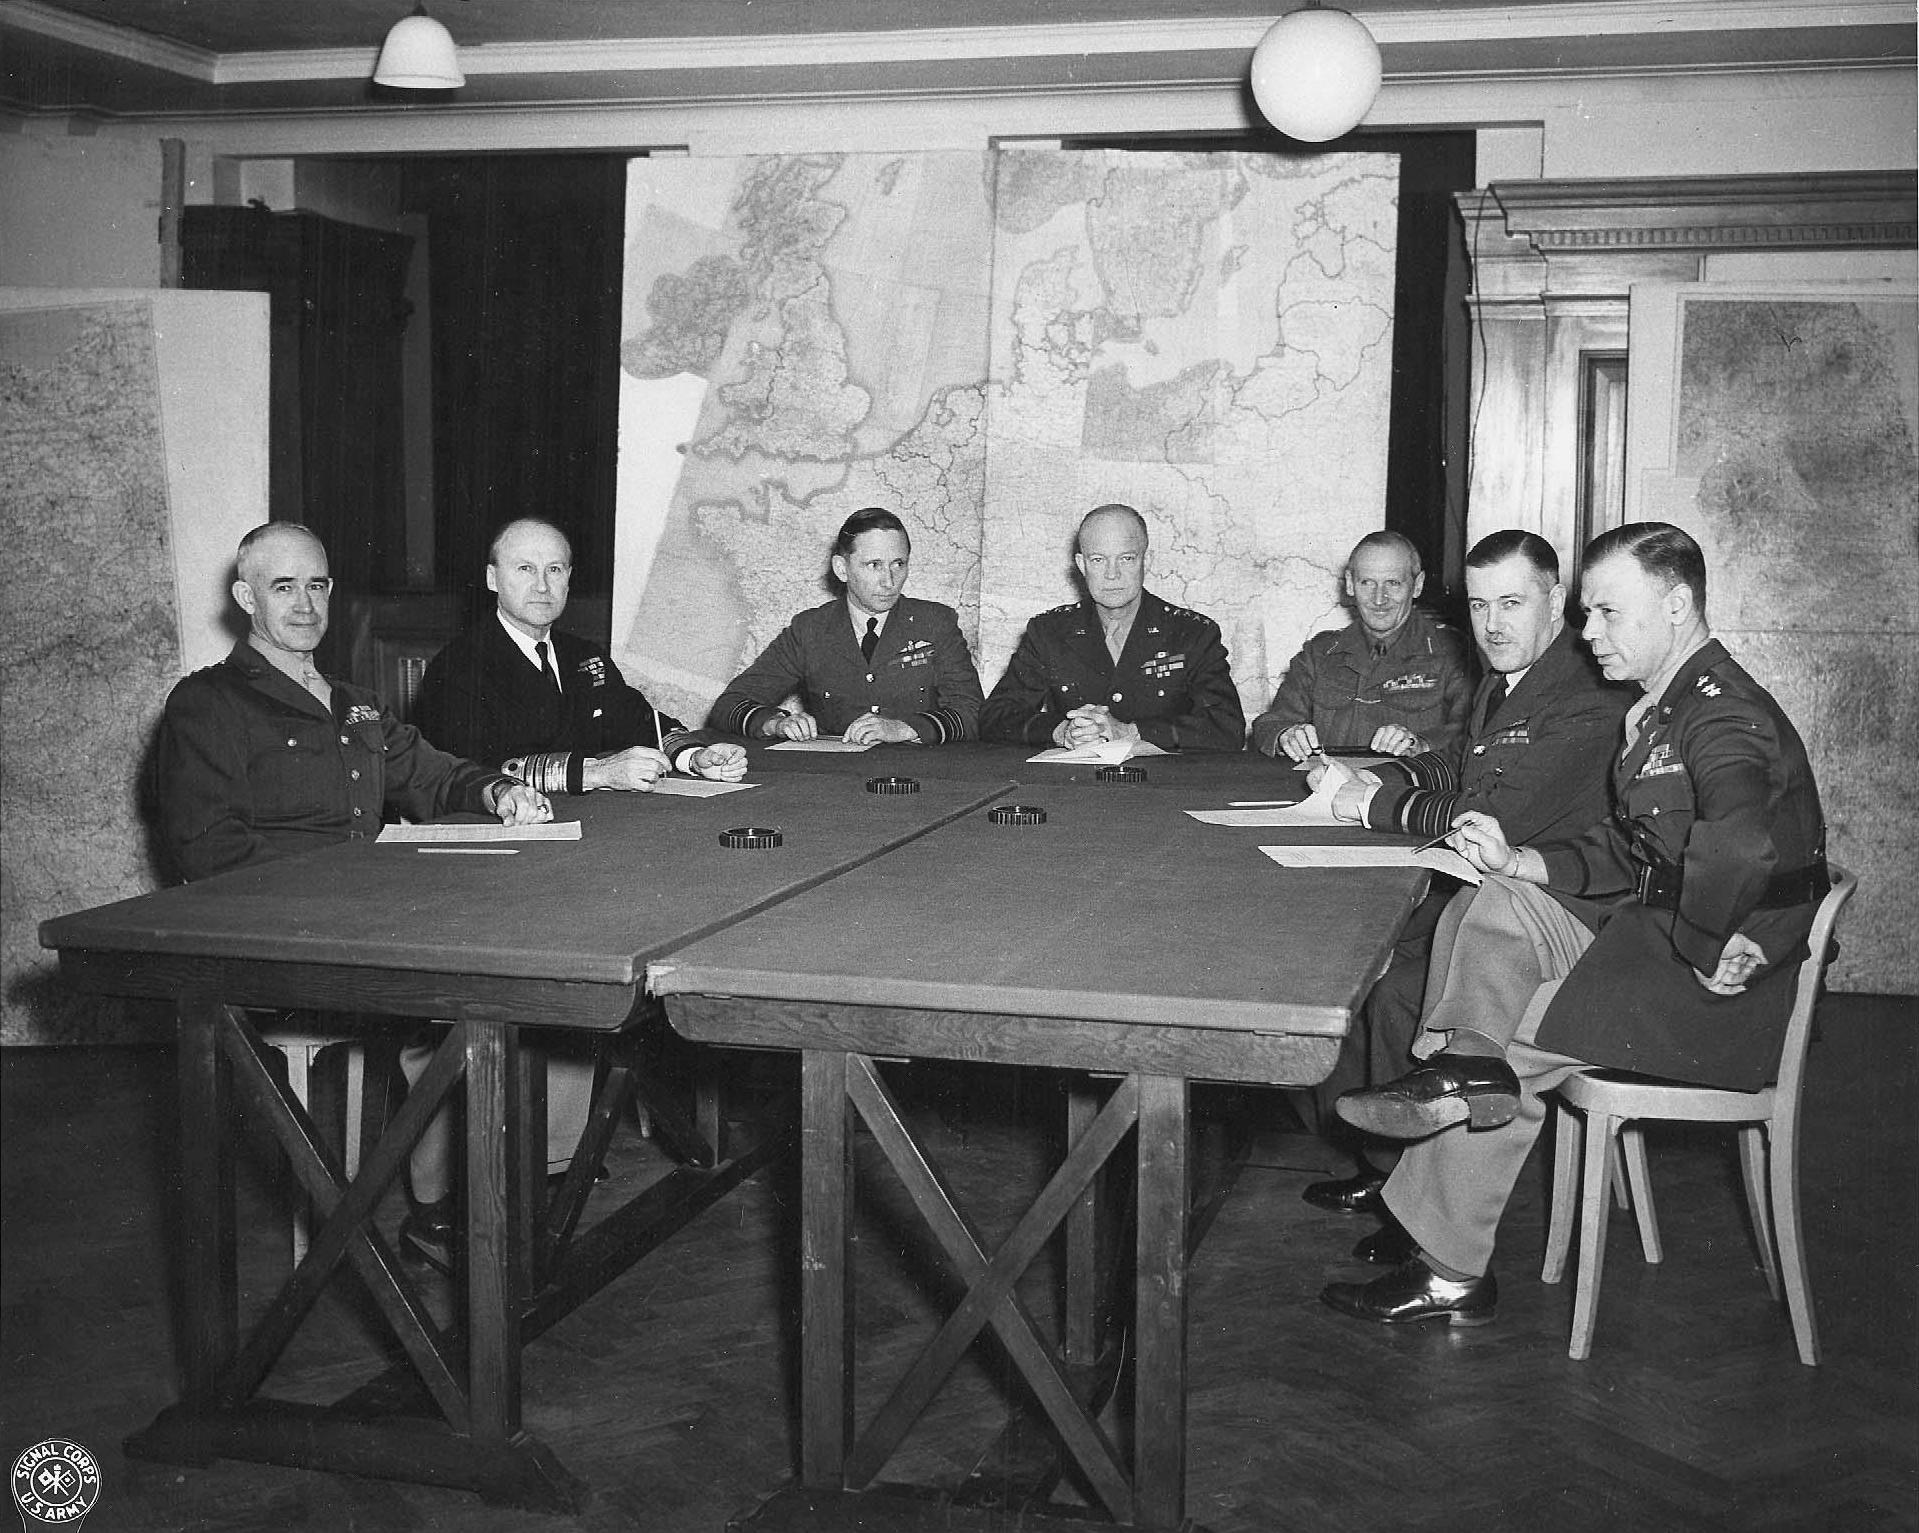 Bradley, Ramsay, Tedder, Eisenhower, Montgomery, Leigh-Mallory, and Smith at a SHAEF conference in London, England, United Kingdom, 1 Feb 1944, photo 1 of 7